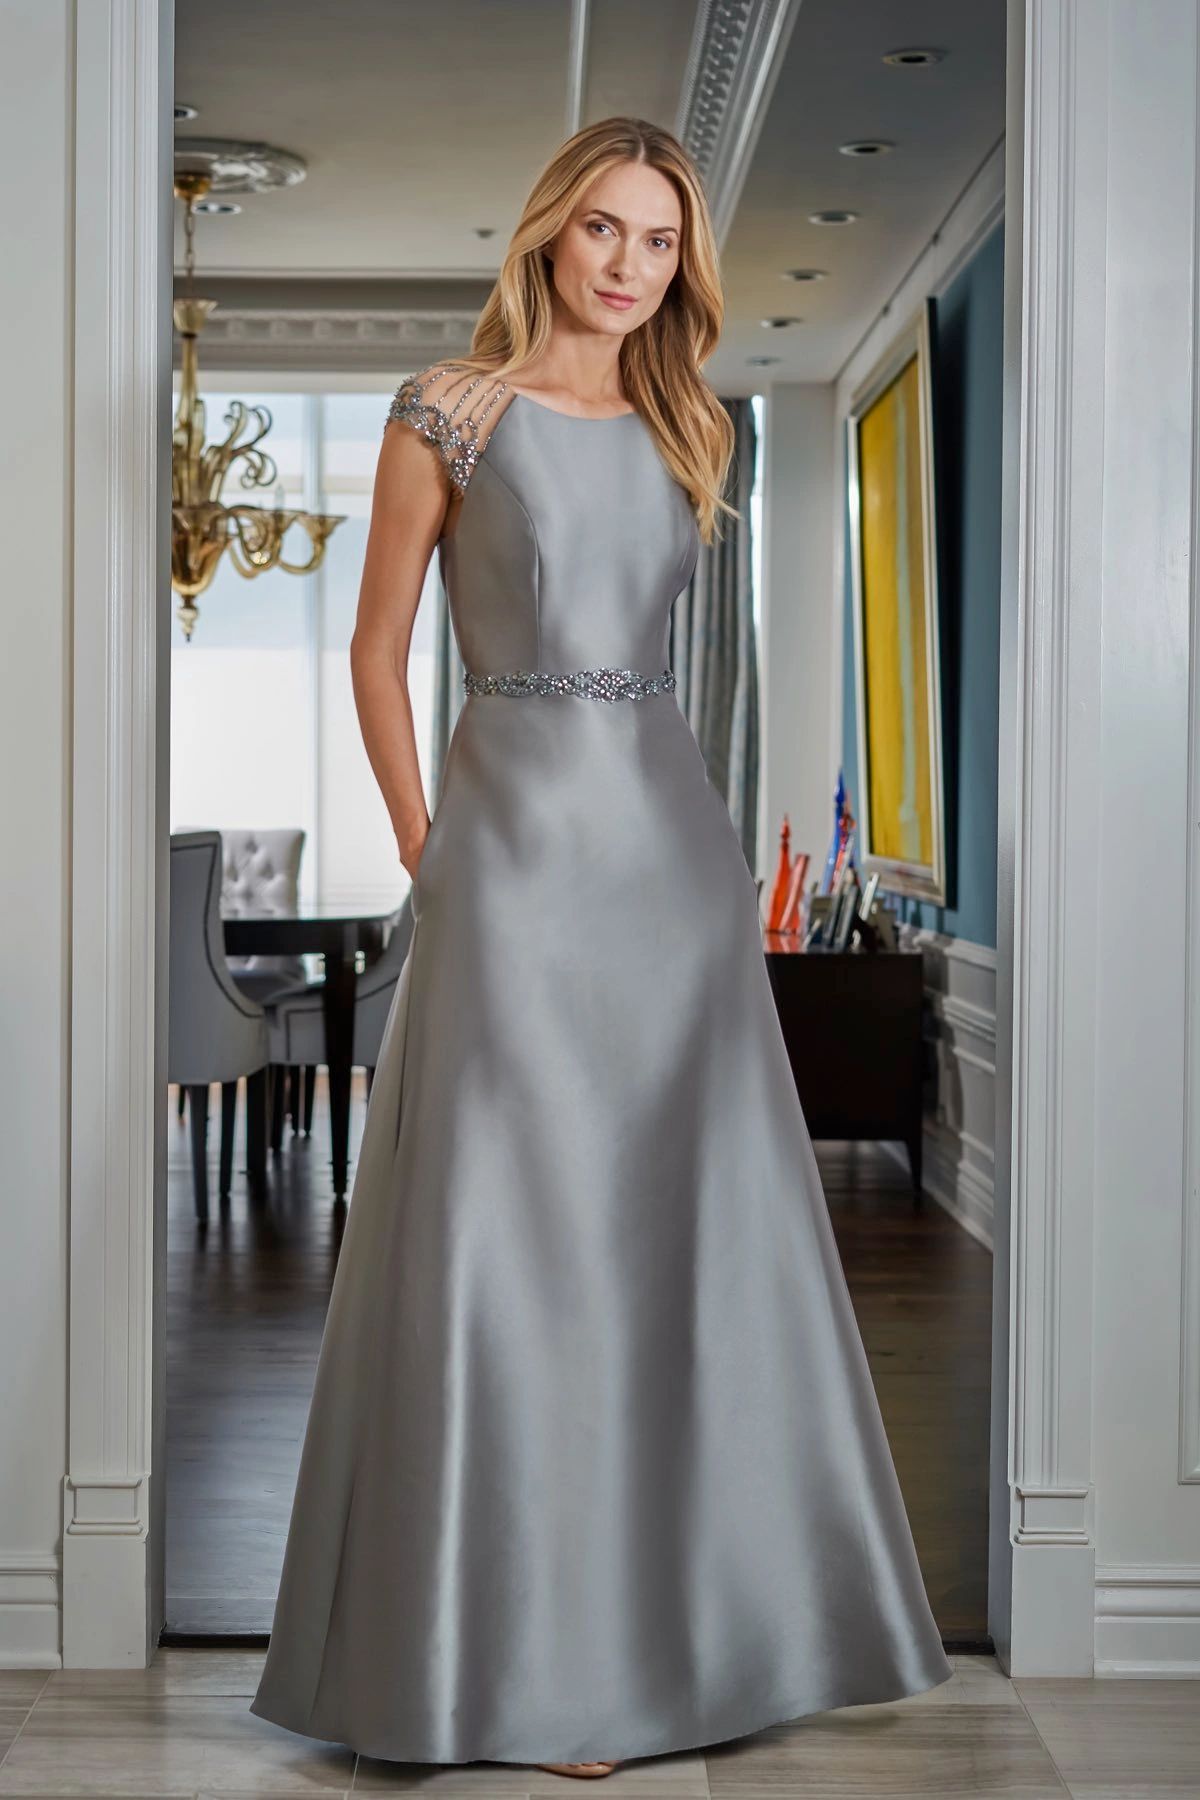 Bridal Boutique - Jade & Jade Couture, Mother of the Bride Dresses